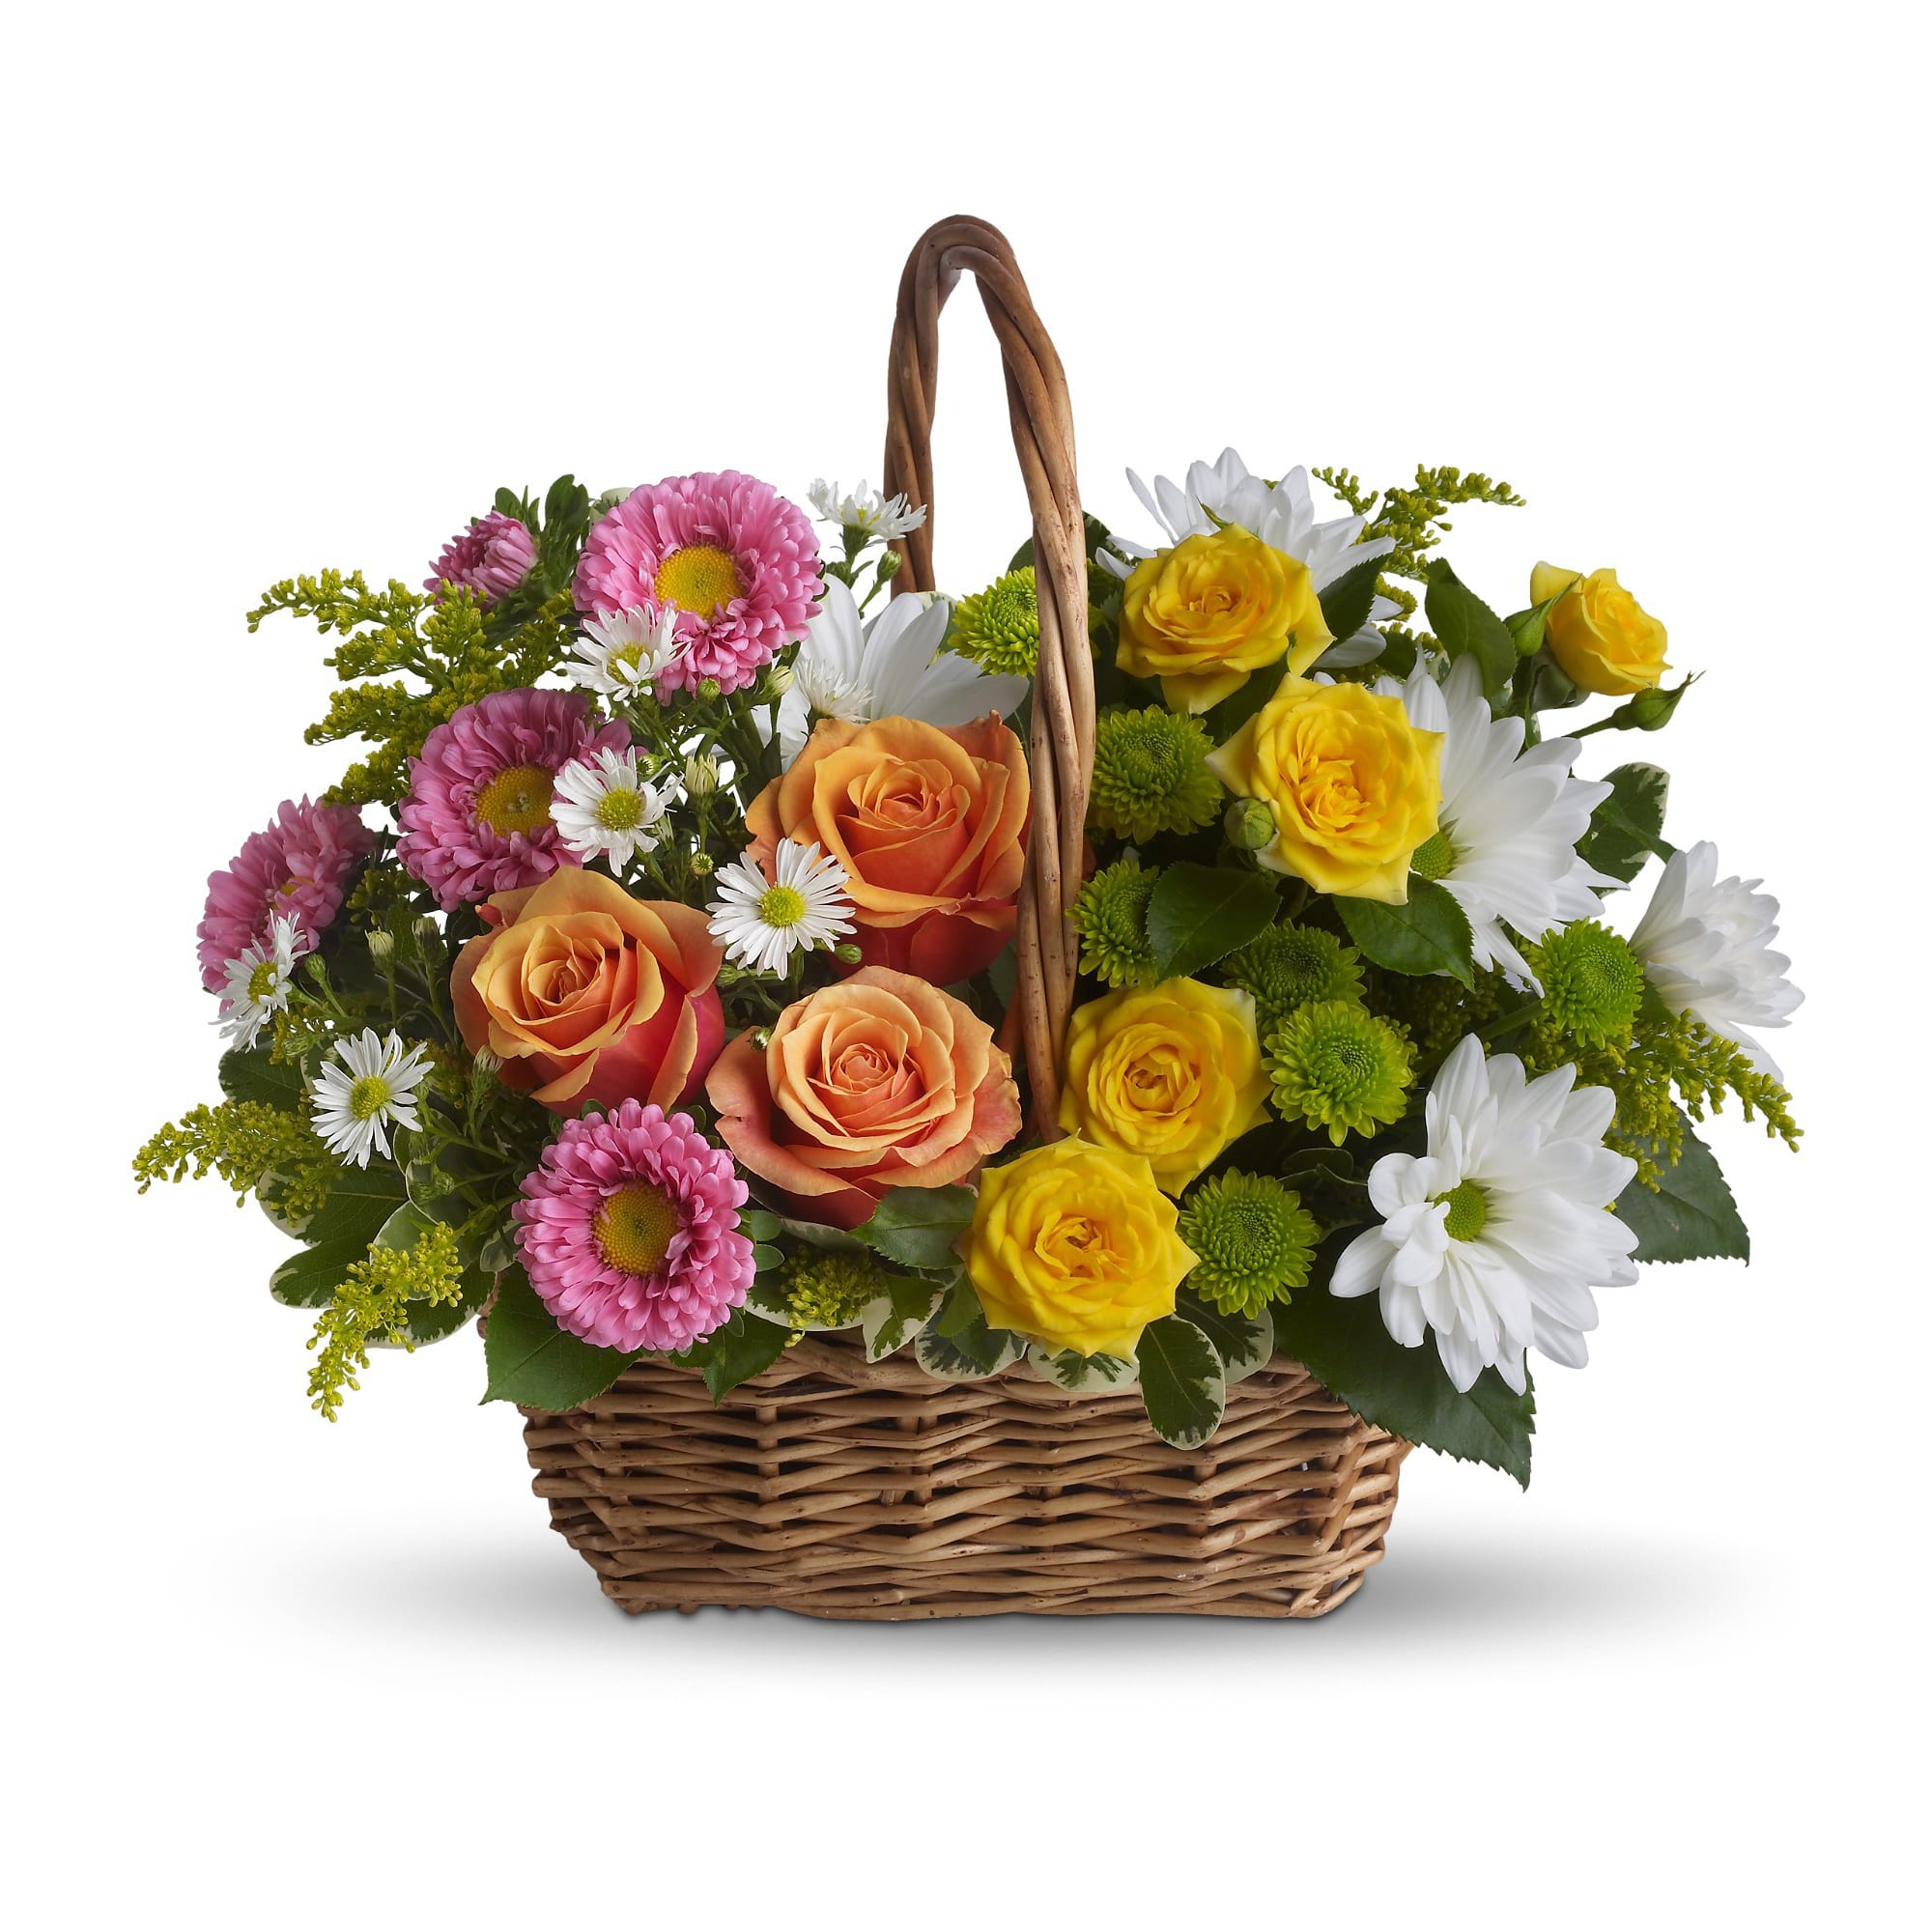 Sweet Tranquility Basket by Teleflora - A basket full of bright blossoms will deliver the warmth of sunshine even when the skies seem gray. This beautiful gift will be appreciated for its life-affirming brilliance and your thoughtfulness at this time. 